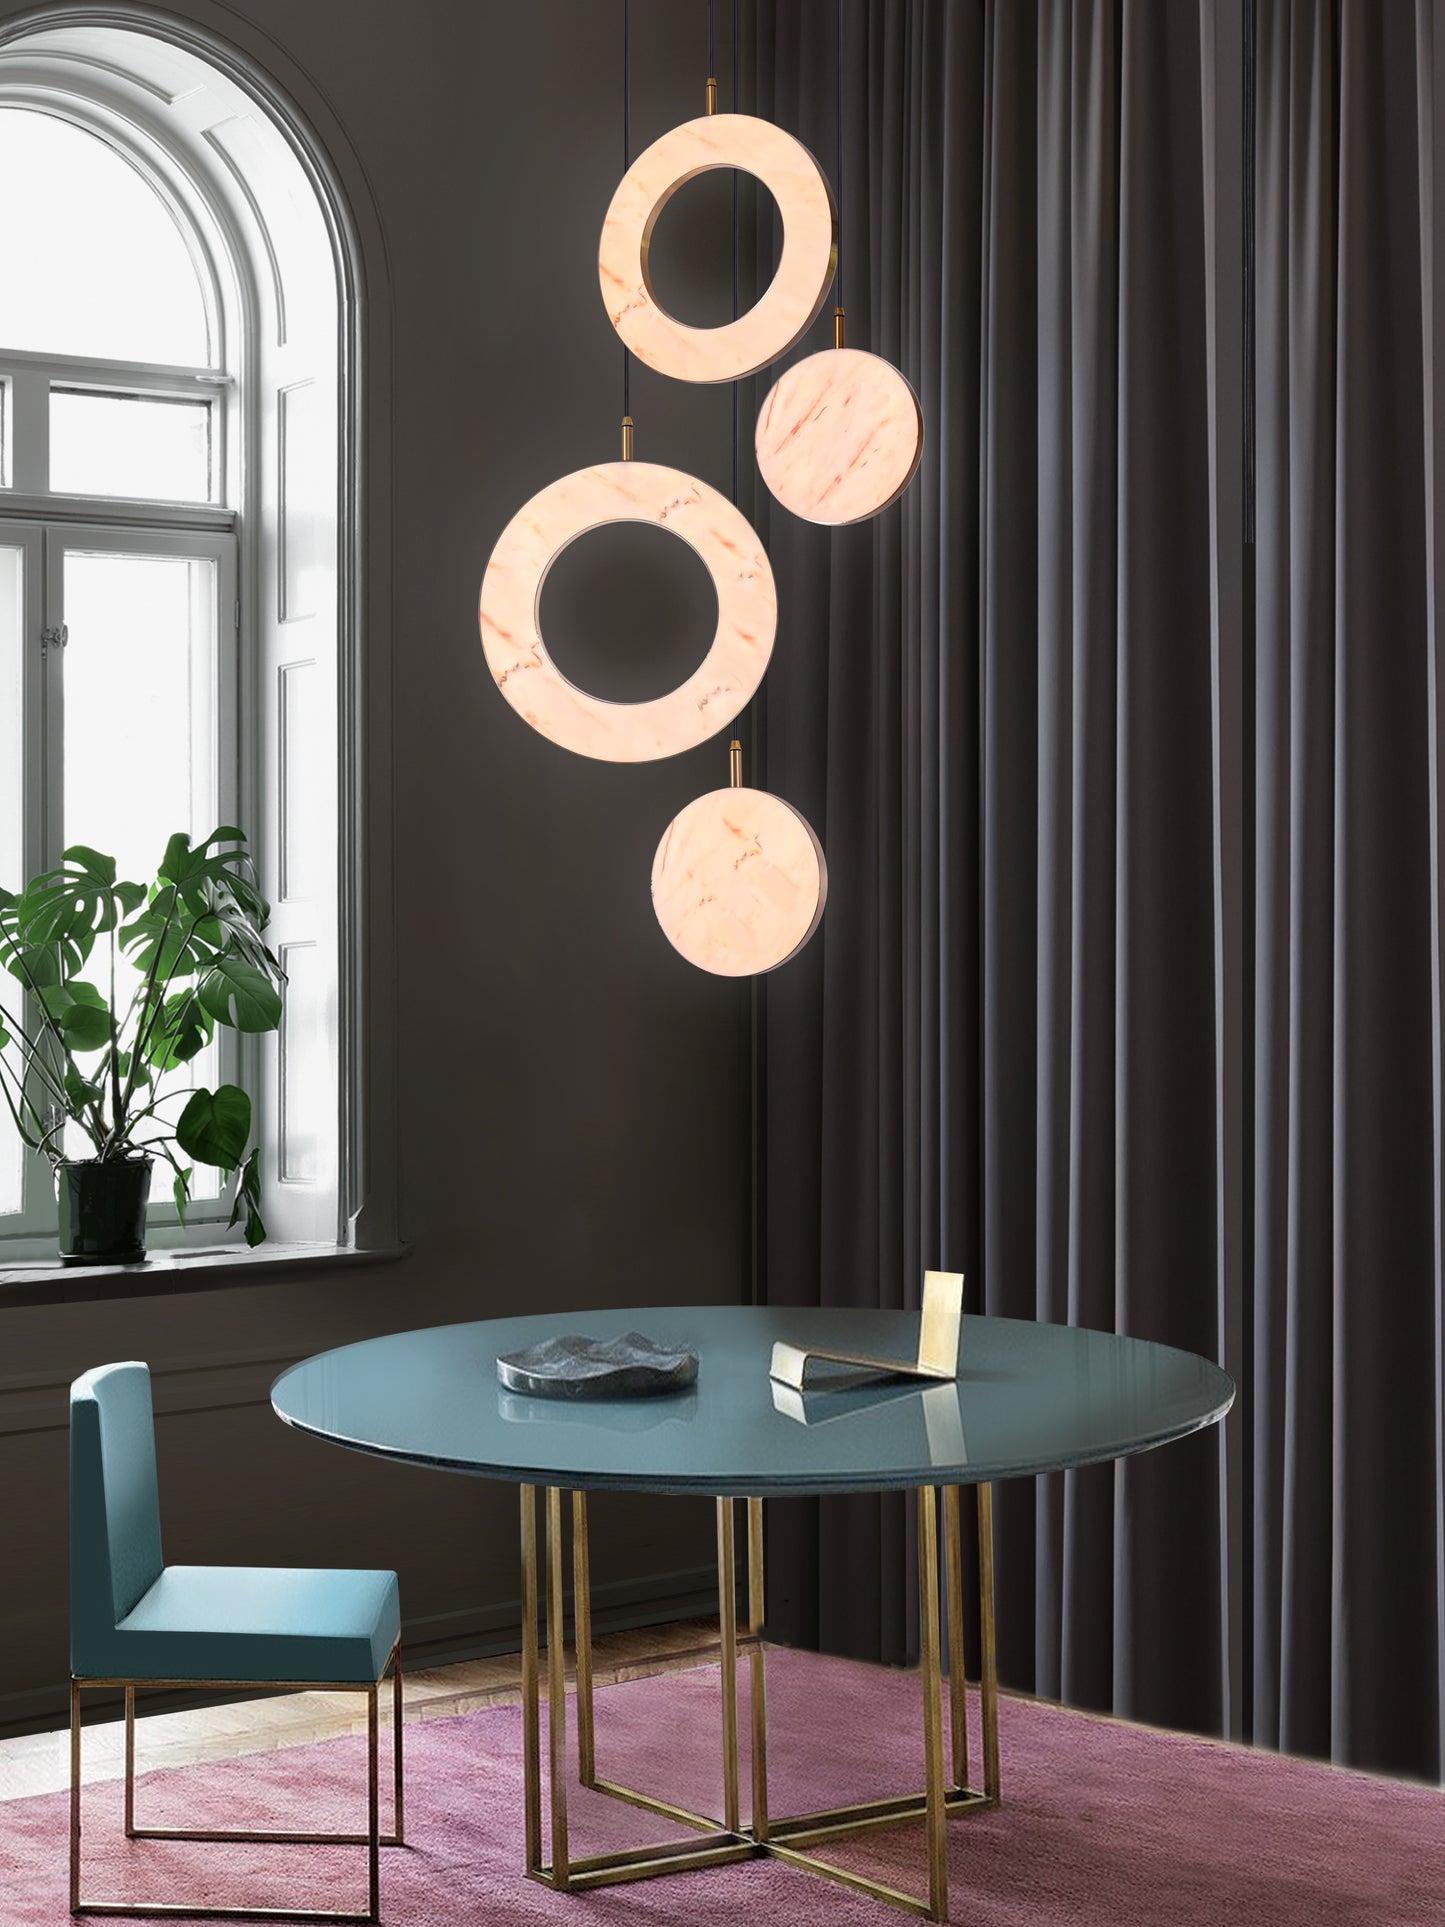 Rosa Ring 4 Cluster Light, hanging from ceiling above table in setting.